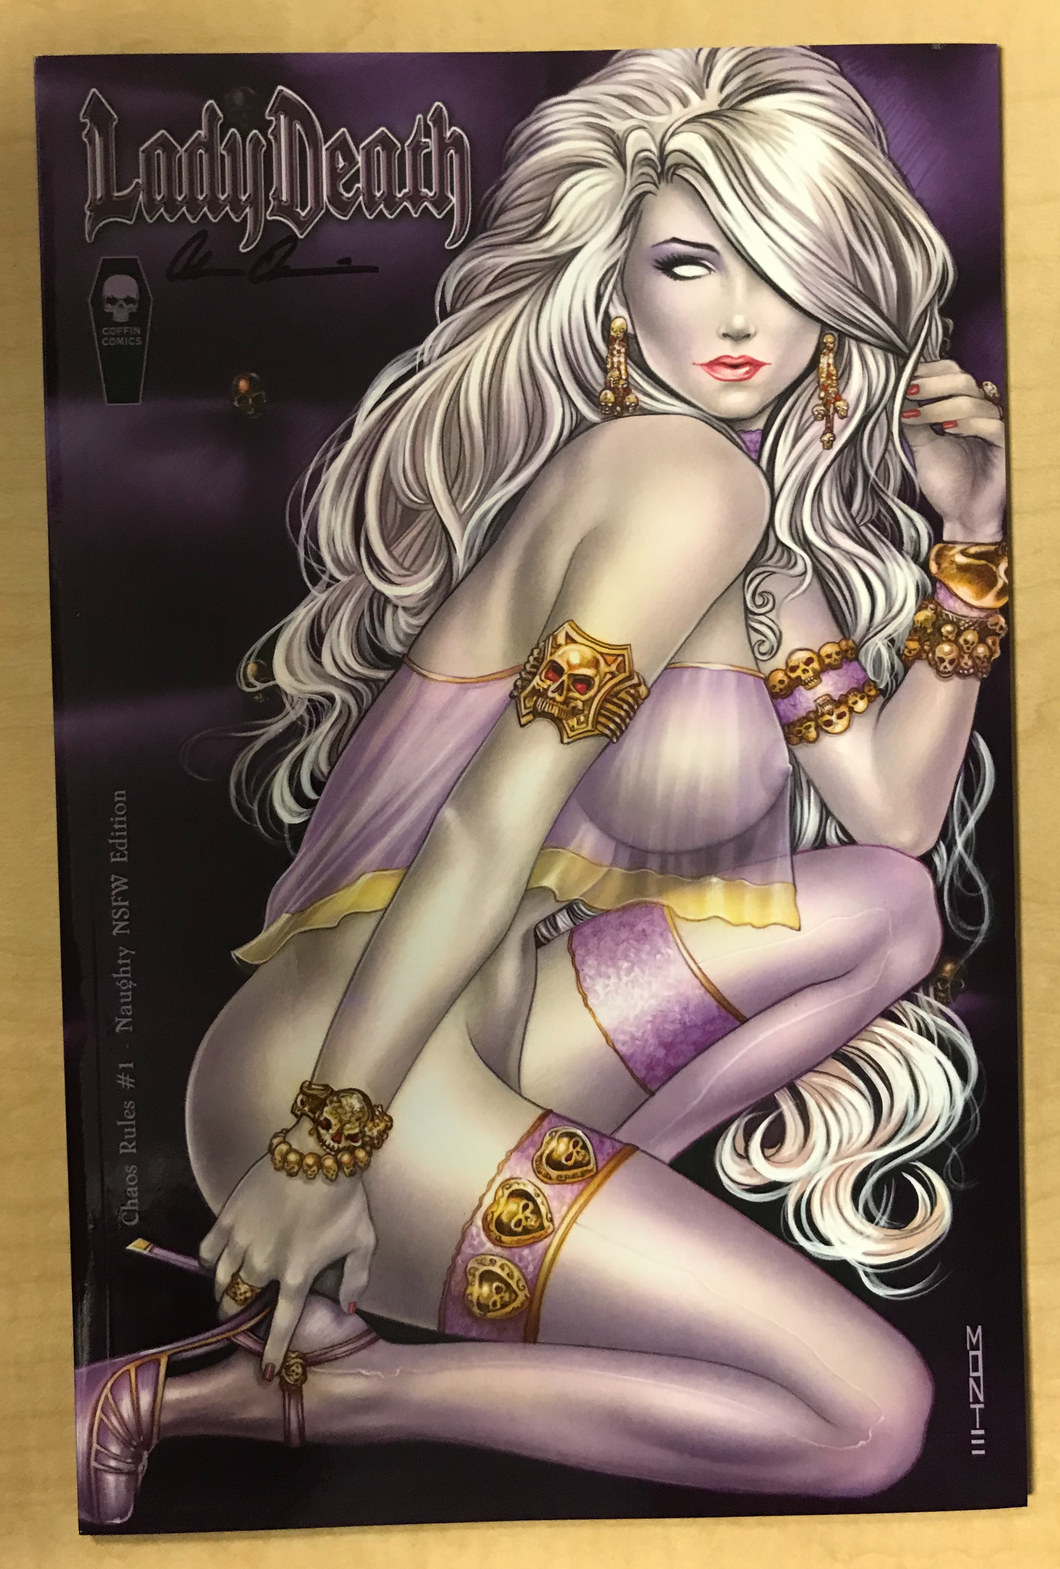 Lady Death: Chaos Rules #1 Naughty NSFW Edition Variant Cover by Monte Moore Signed by Brian Pulido w/ COA!!!